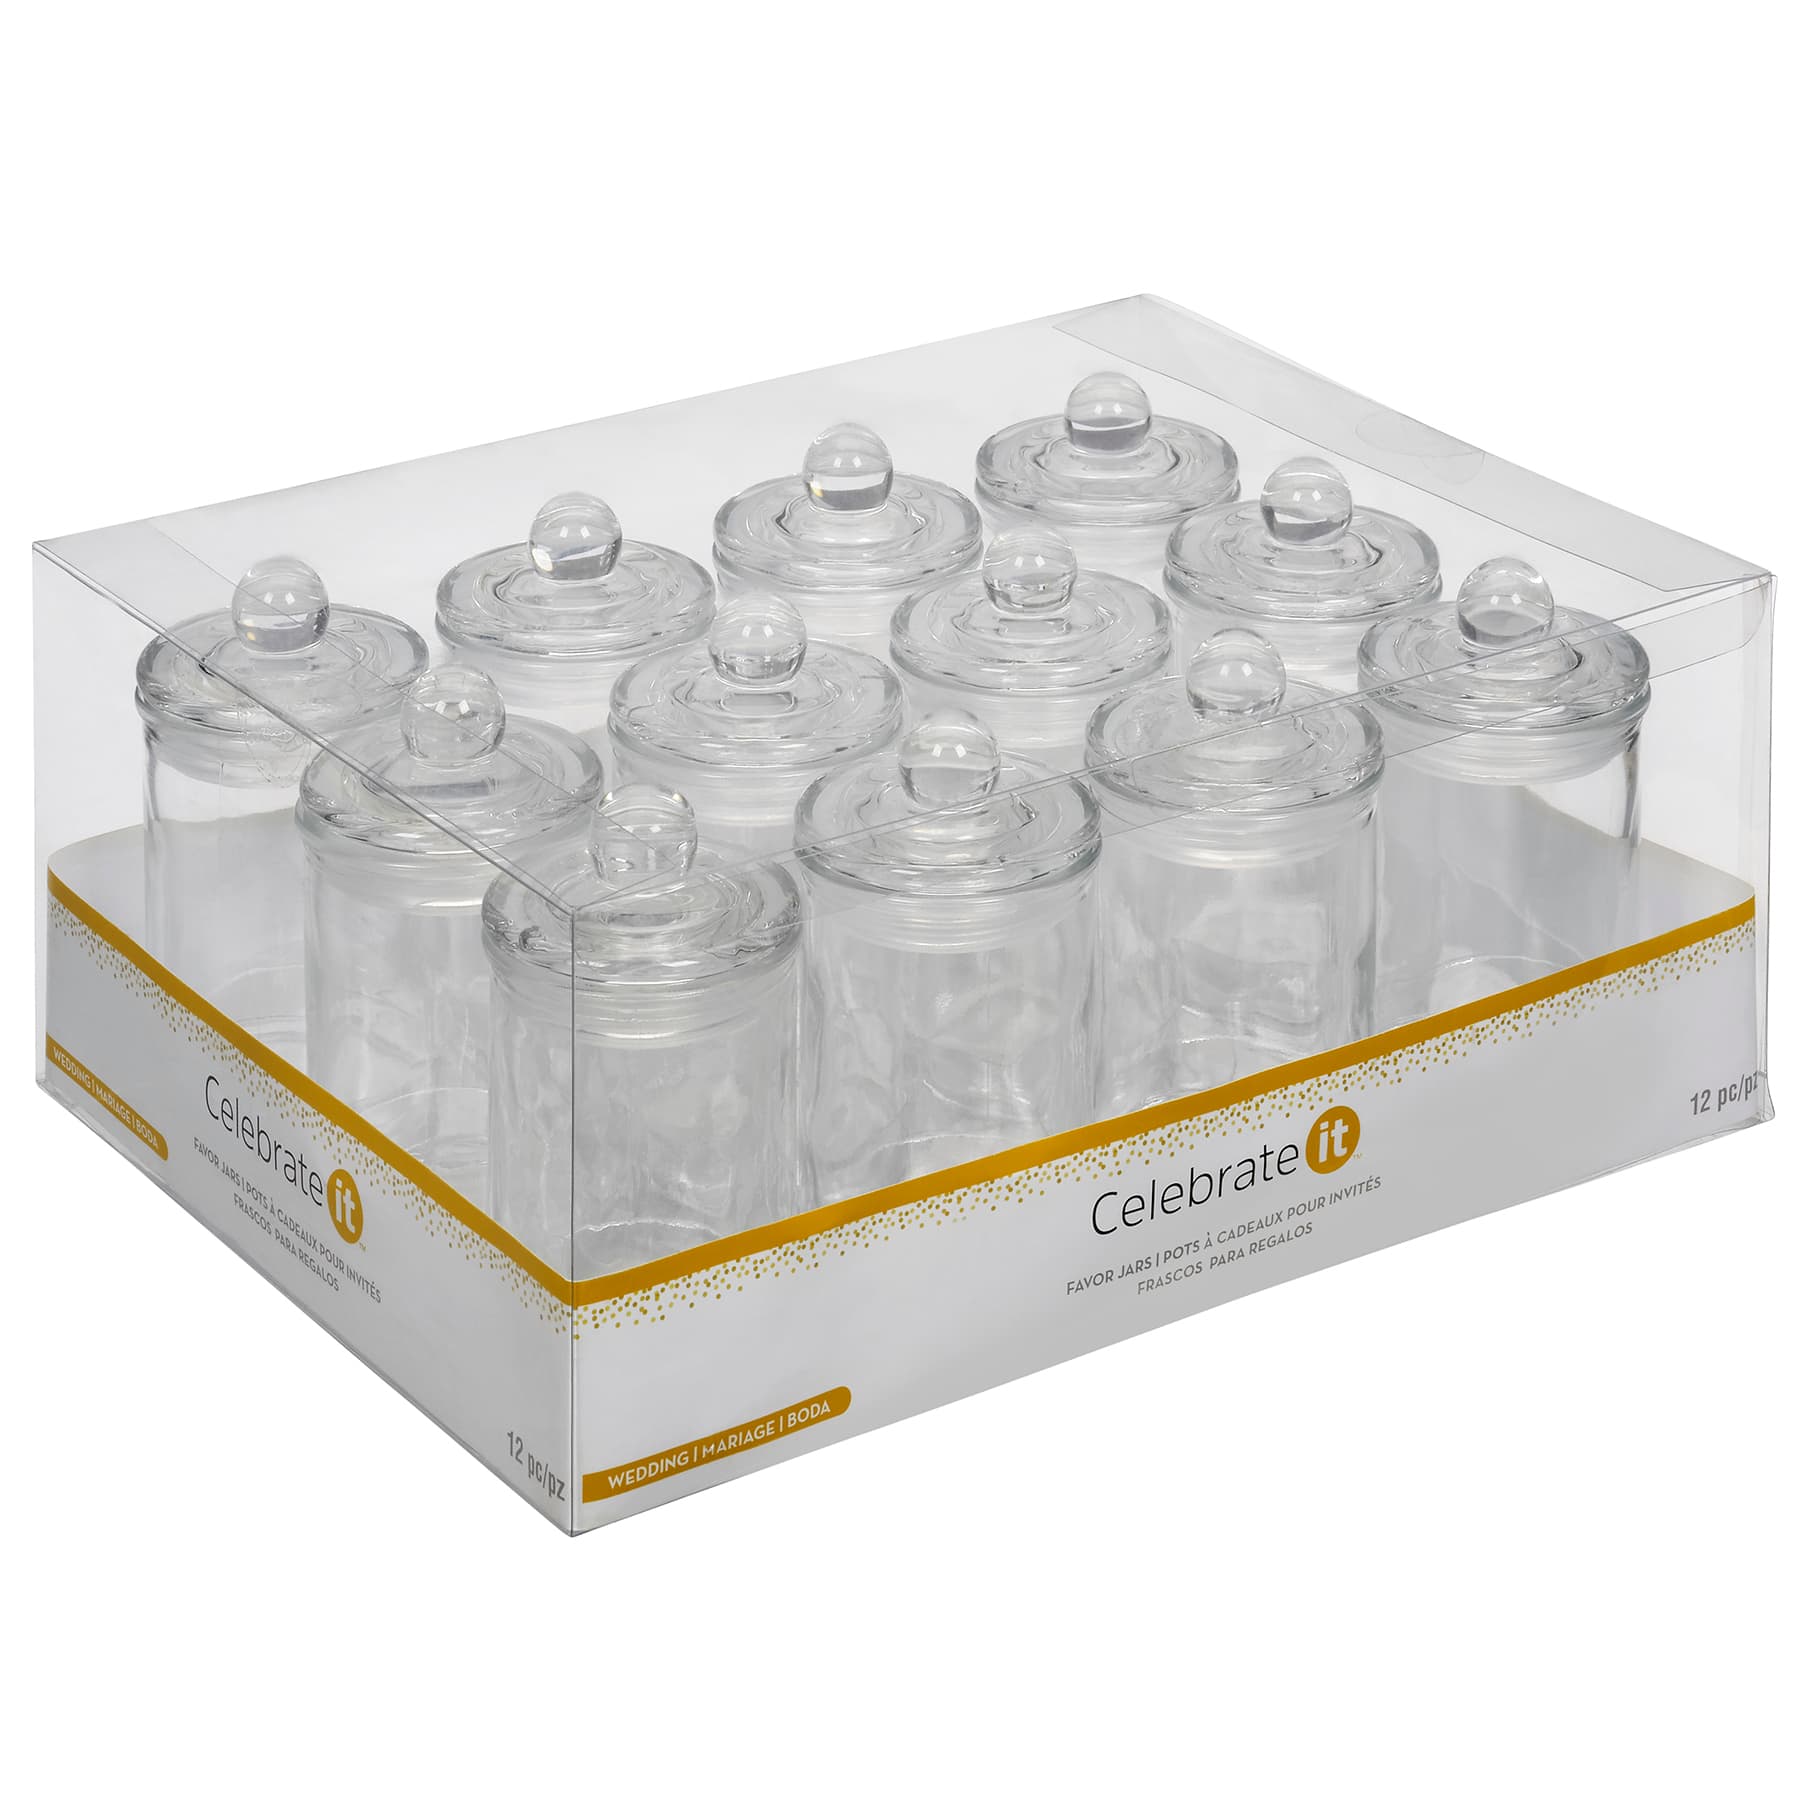 6 Packs: 12 ct. (72 total) Mini Glass Jars with Lids by Celebrate It&#x2122;